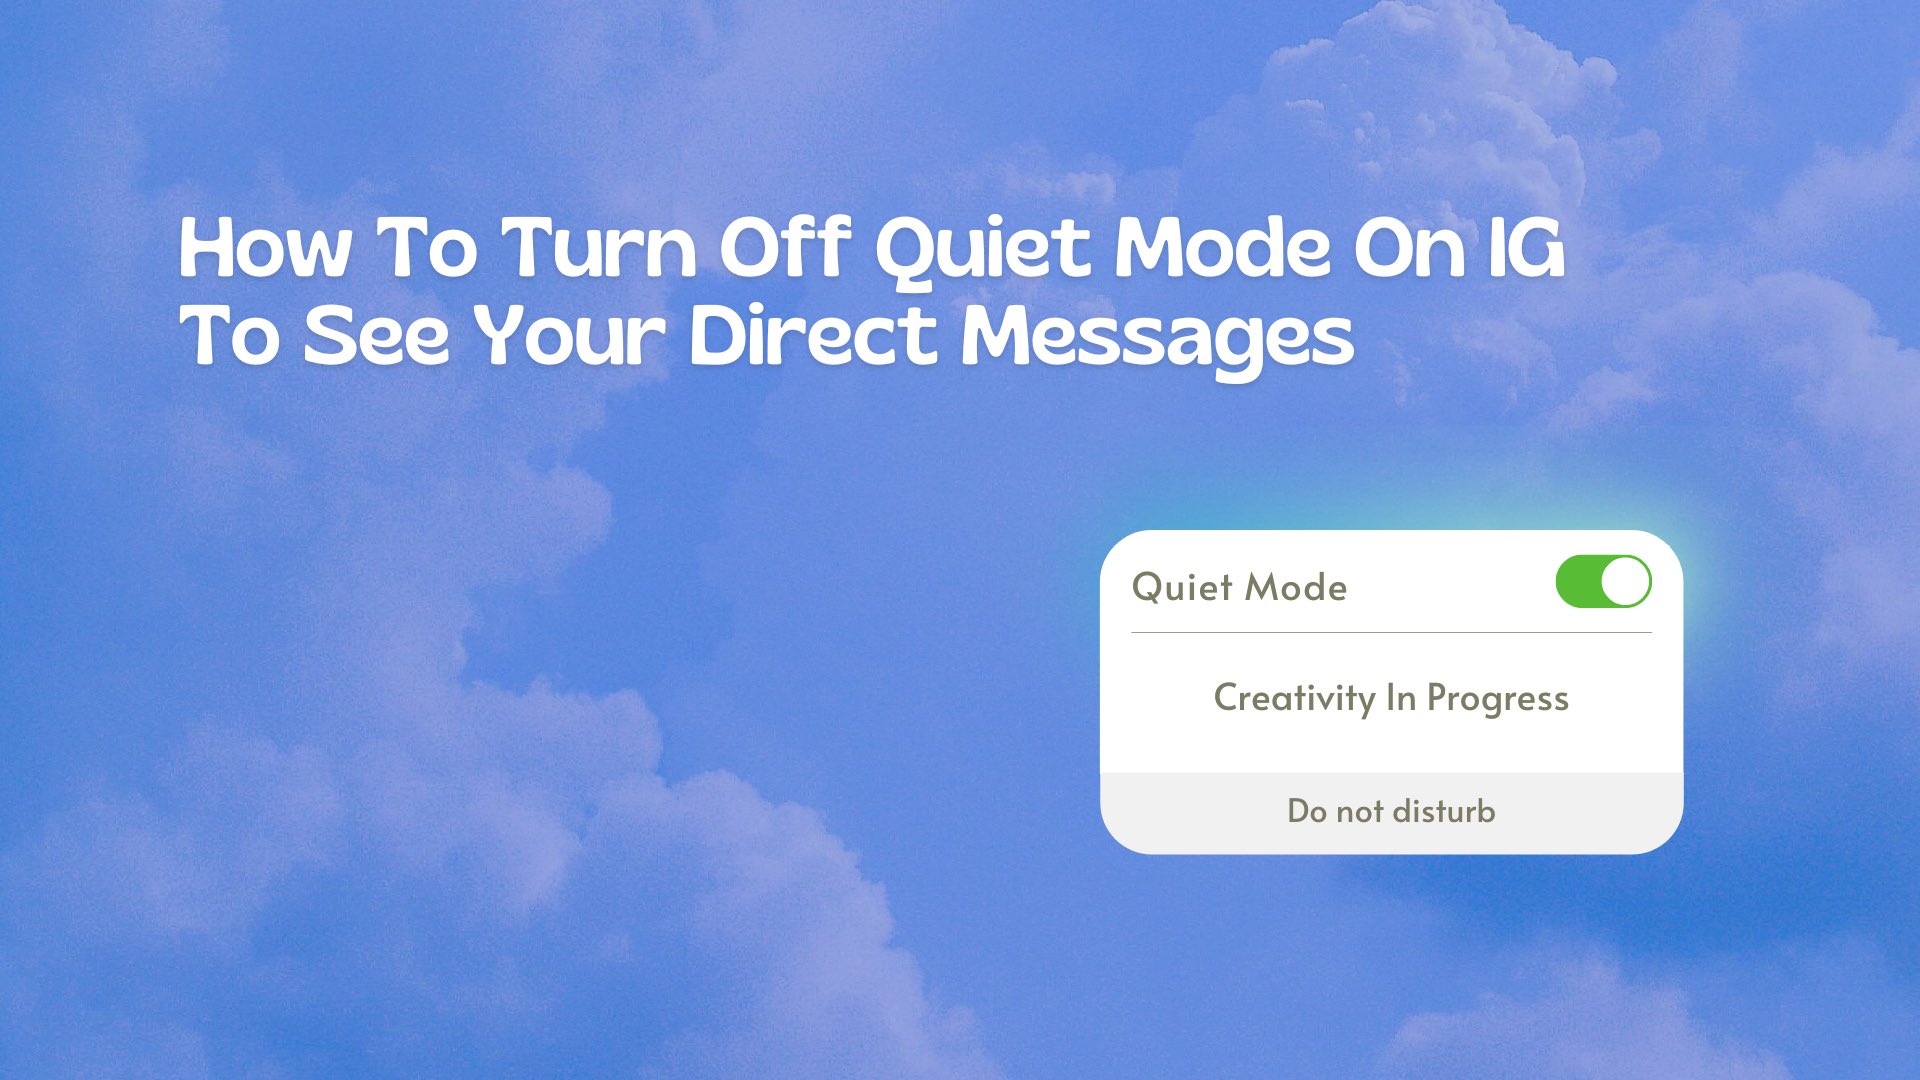 How To Turn Off Quiet Mode On Instagram To See Your Direct Messages